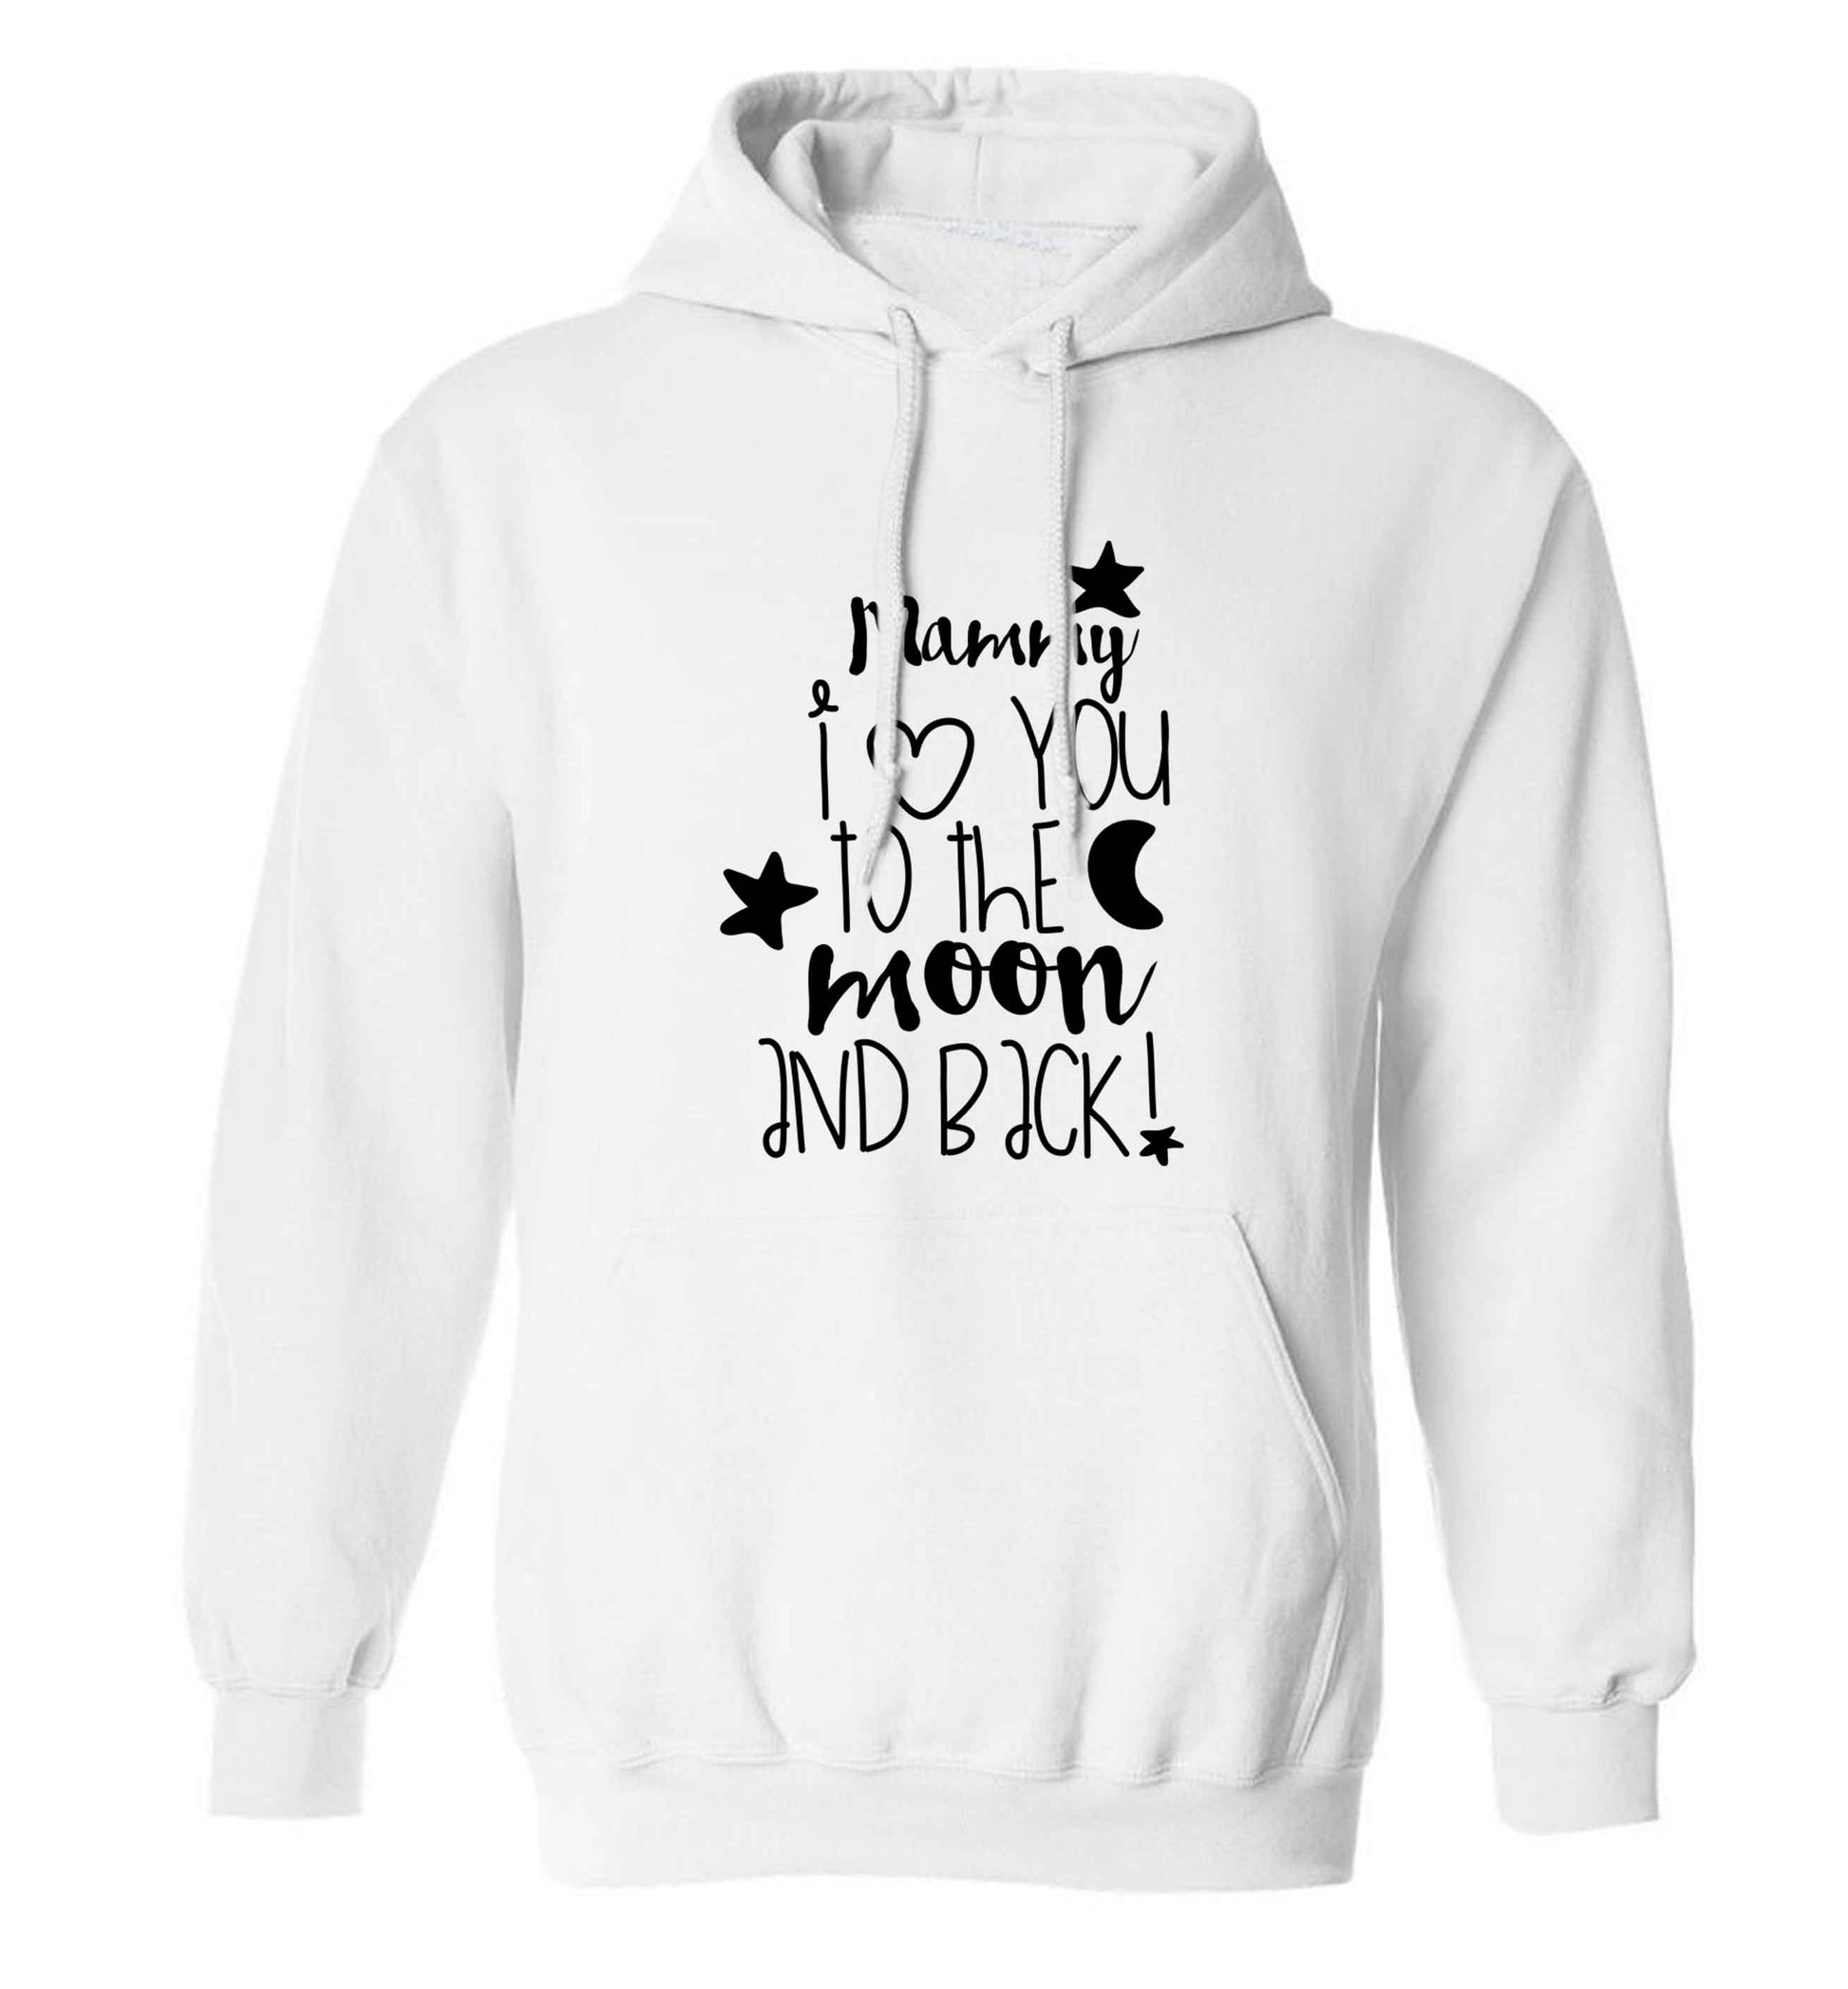 Mammy I love you to the moon and back adults unisex white hoodie 2XL